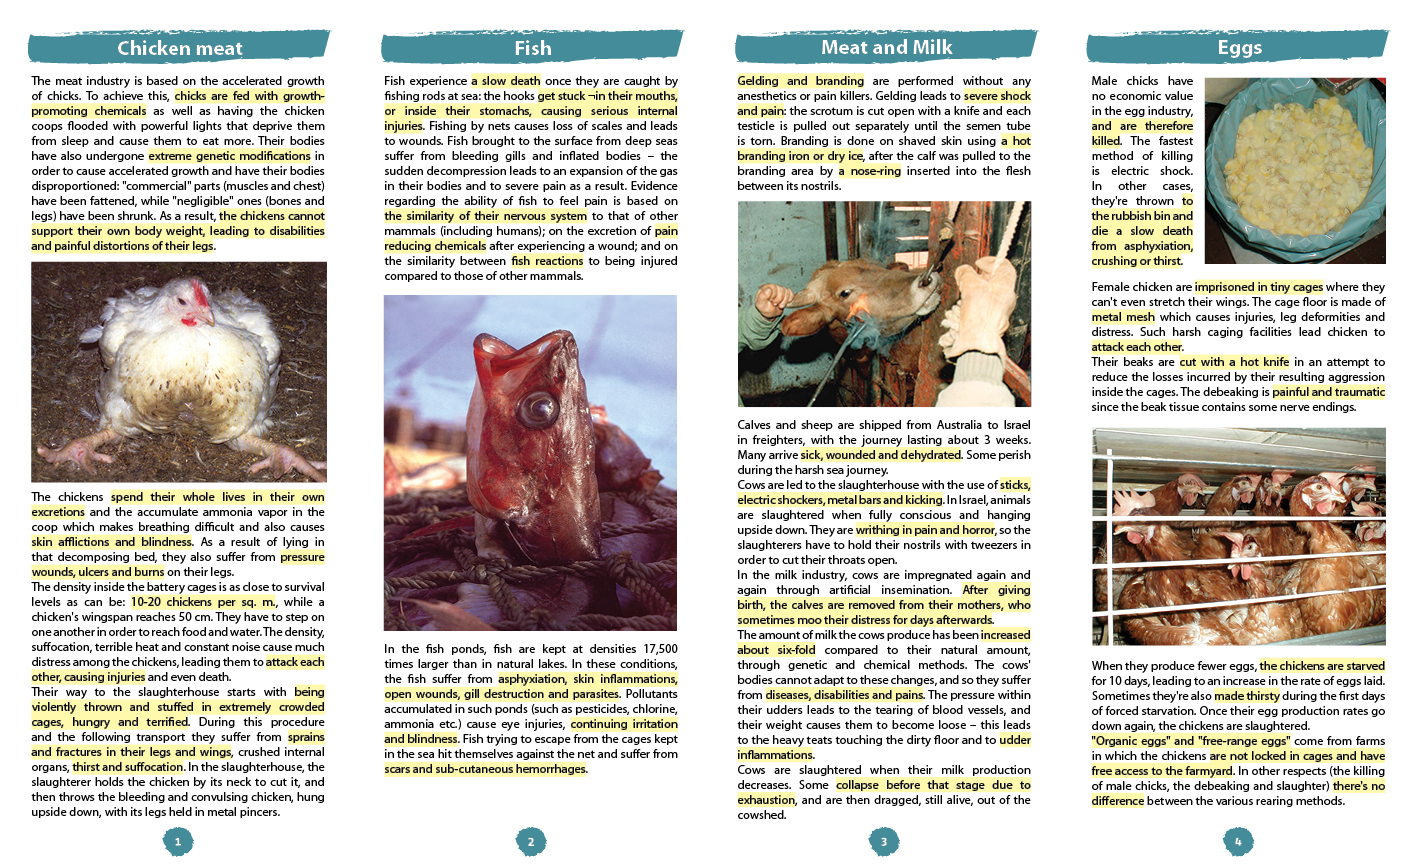 the text features pictures of various animals